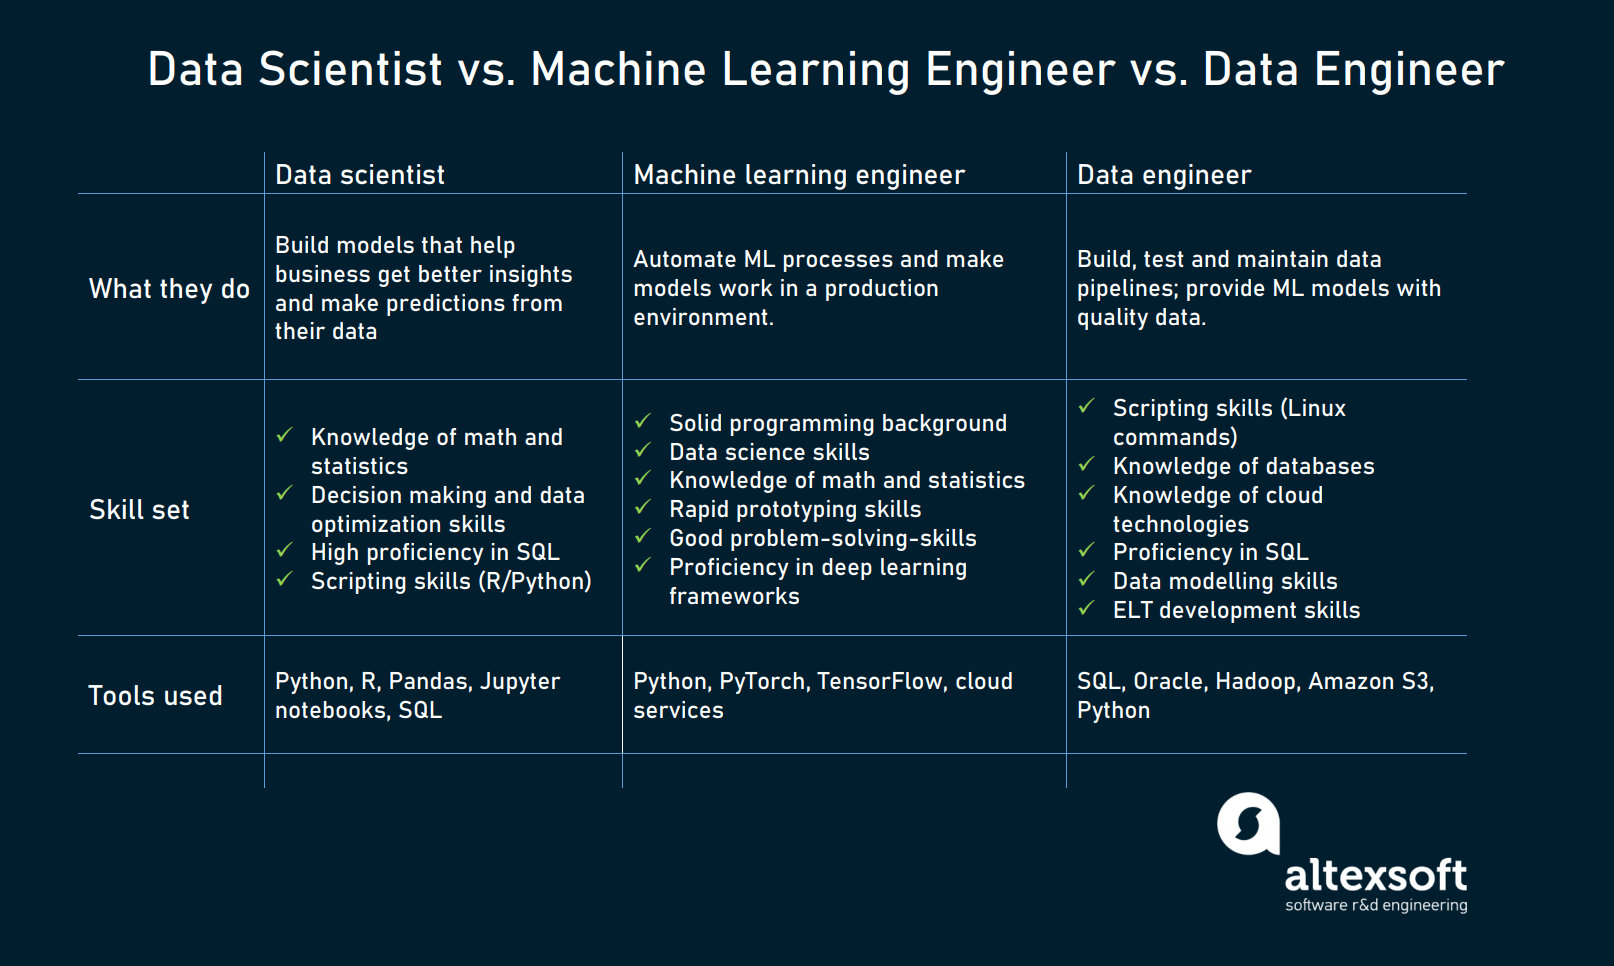 How a machine learning engineer differs from a data scientist and a data engineer